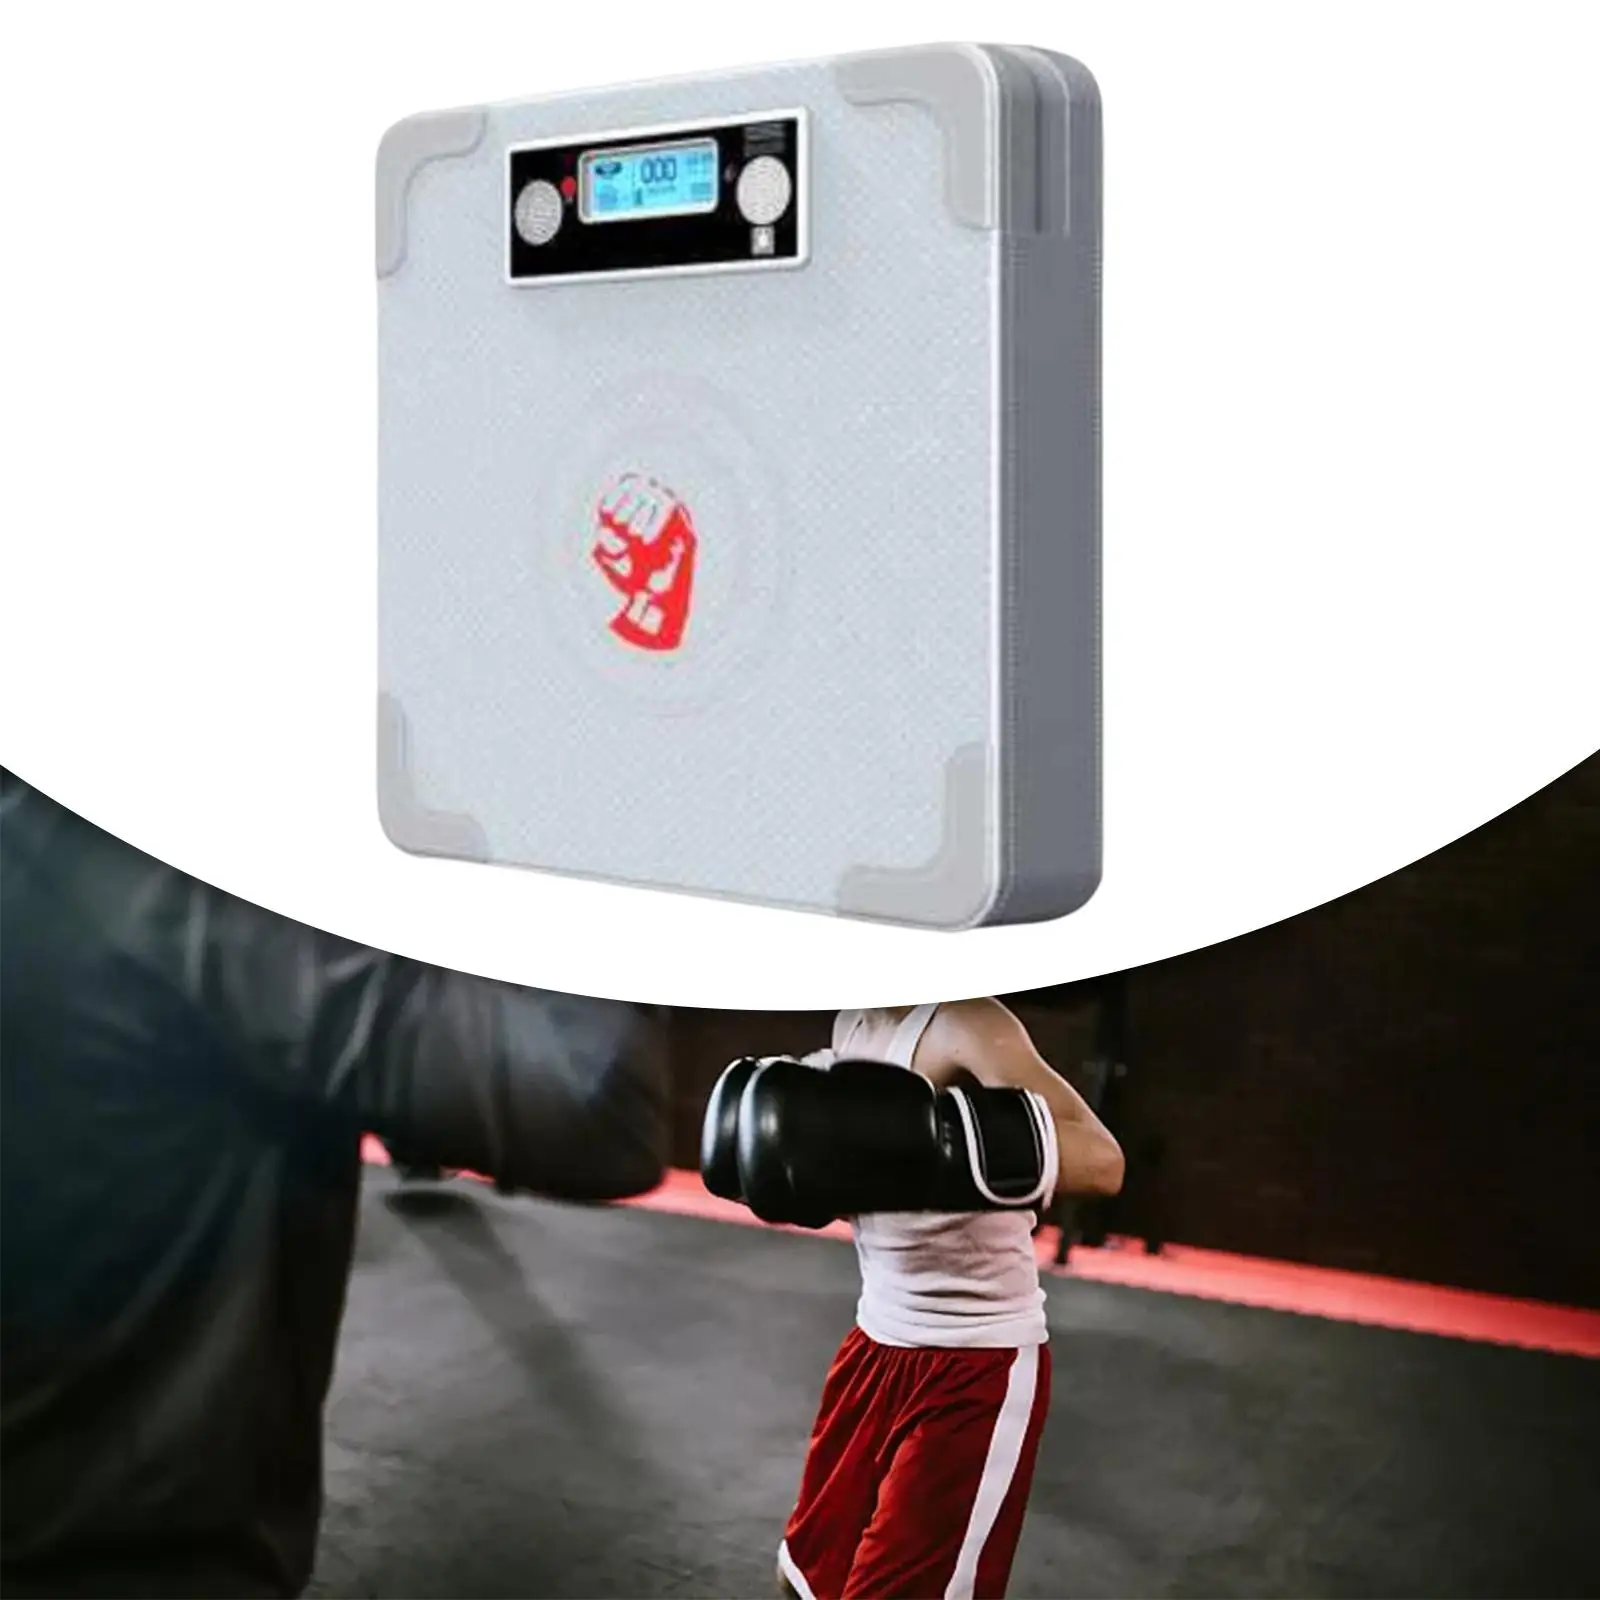 PU Leather Boxing Sandbag Force Tester Boxing Equipment Wall Target Martial Arts Sports Intelligent for Youth Gyms Workouts